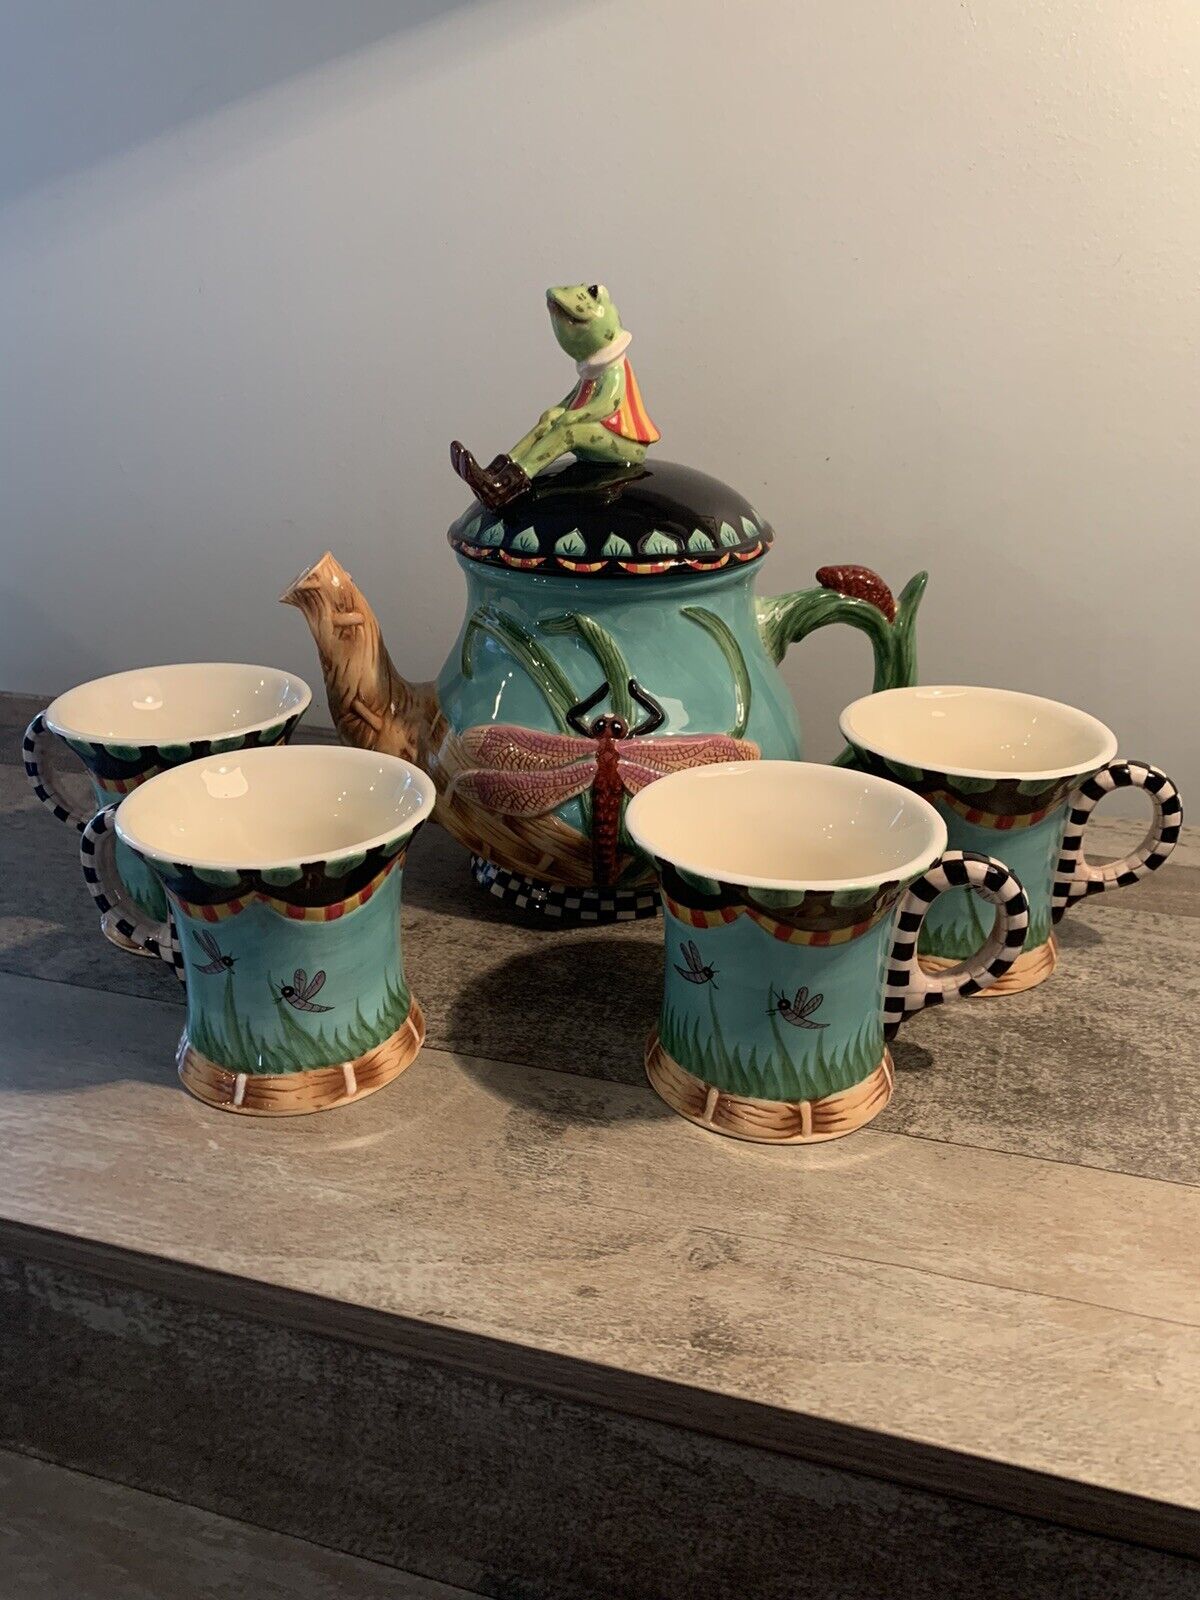 Tea Set Peggy Fairfax Herrick Frog And Dragonfly Ceramic Full Set Collectible